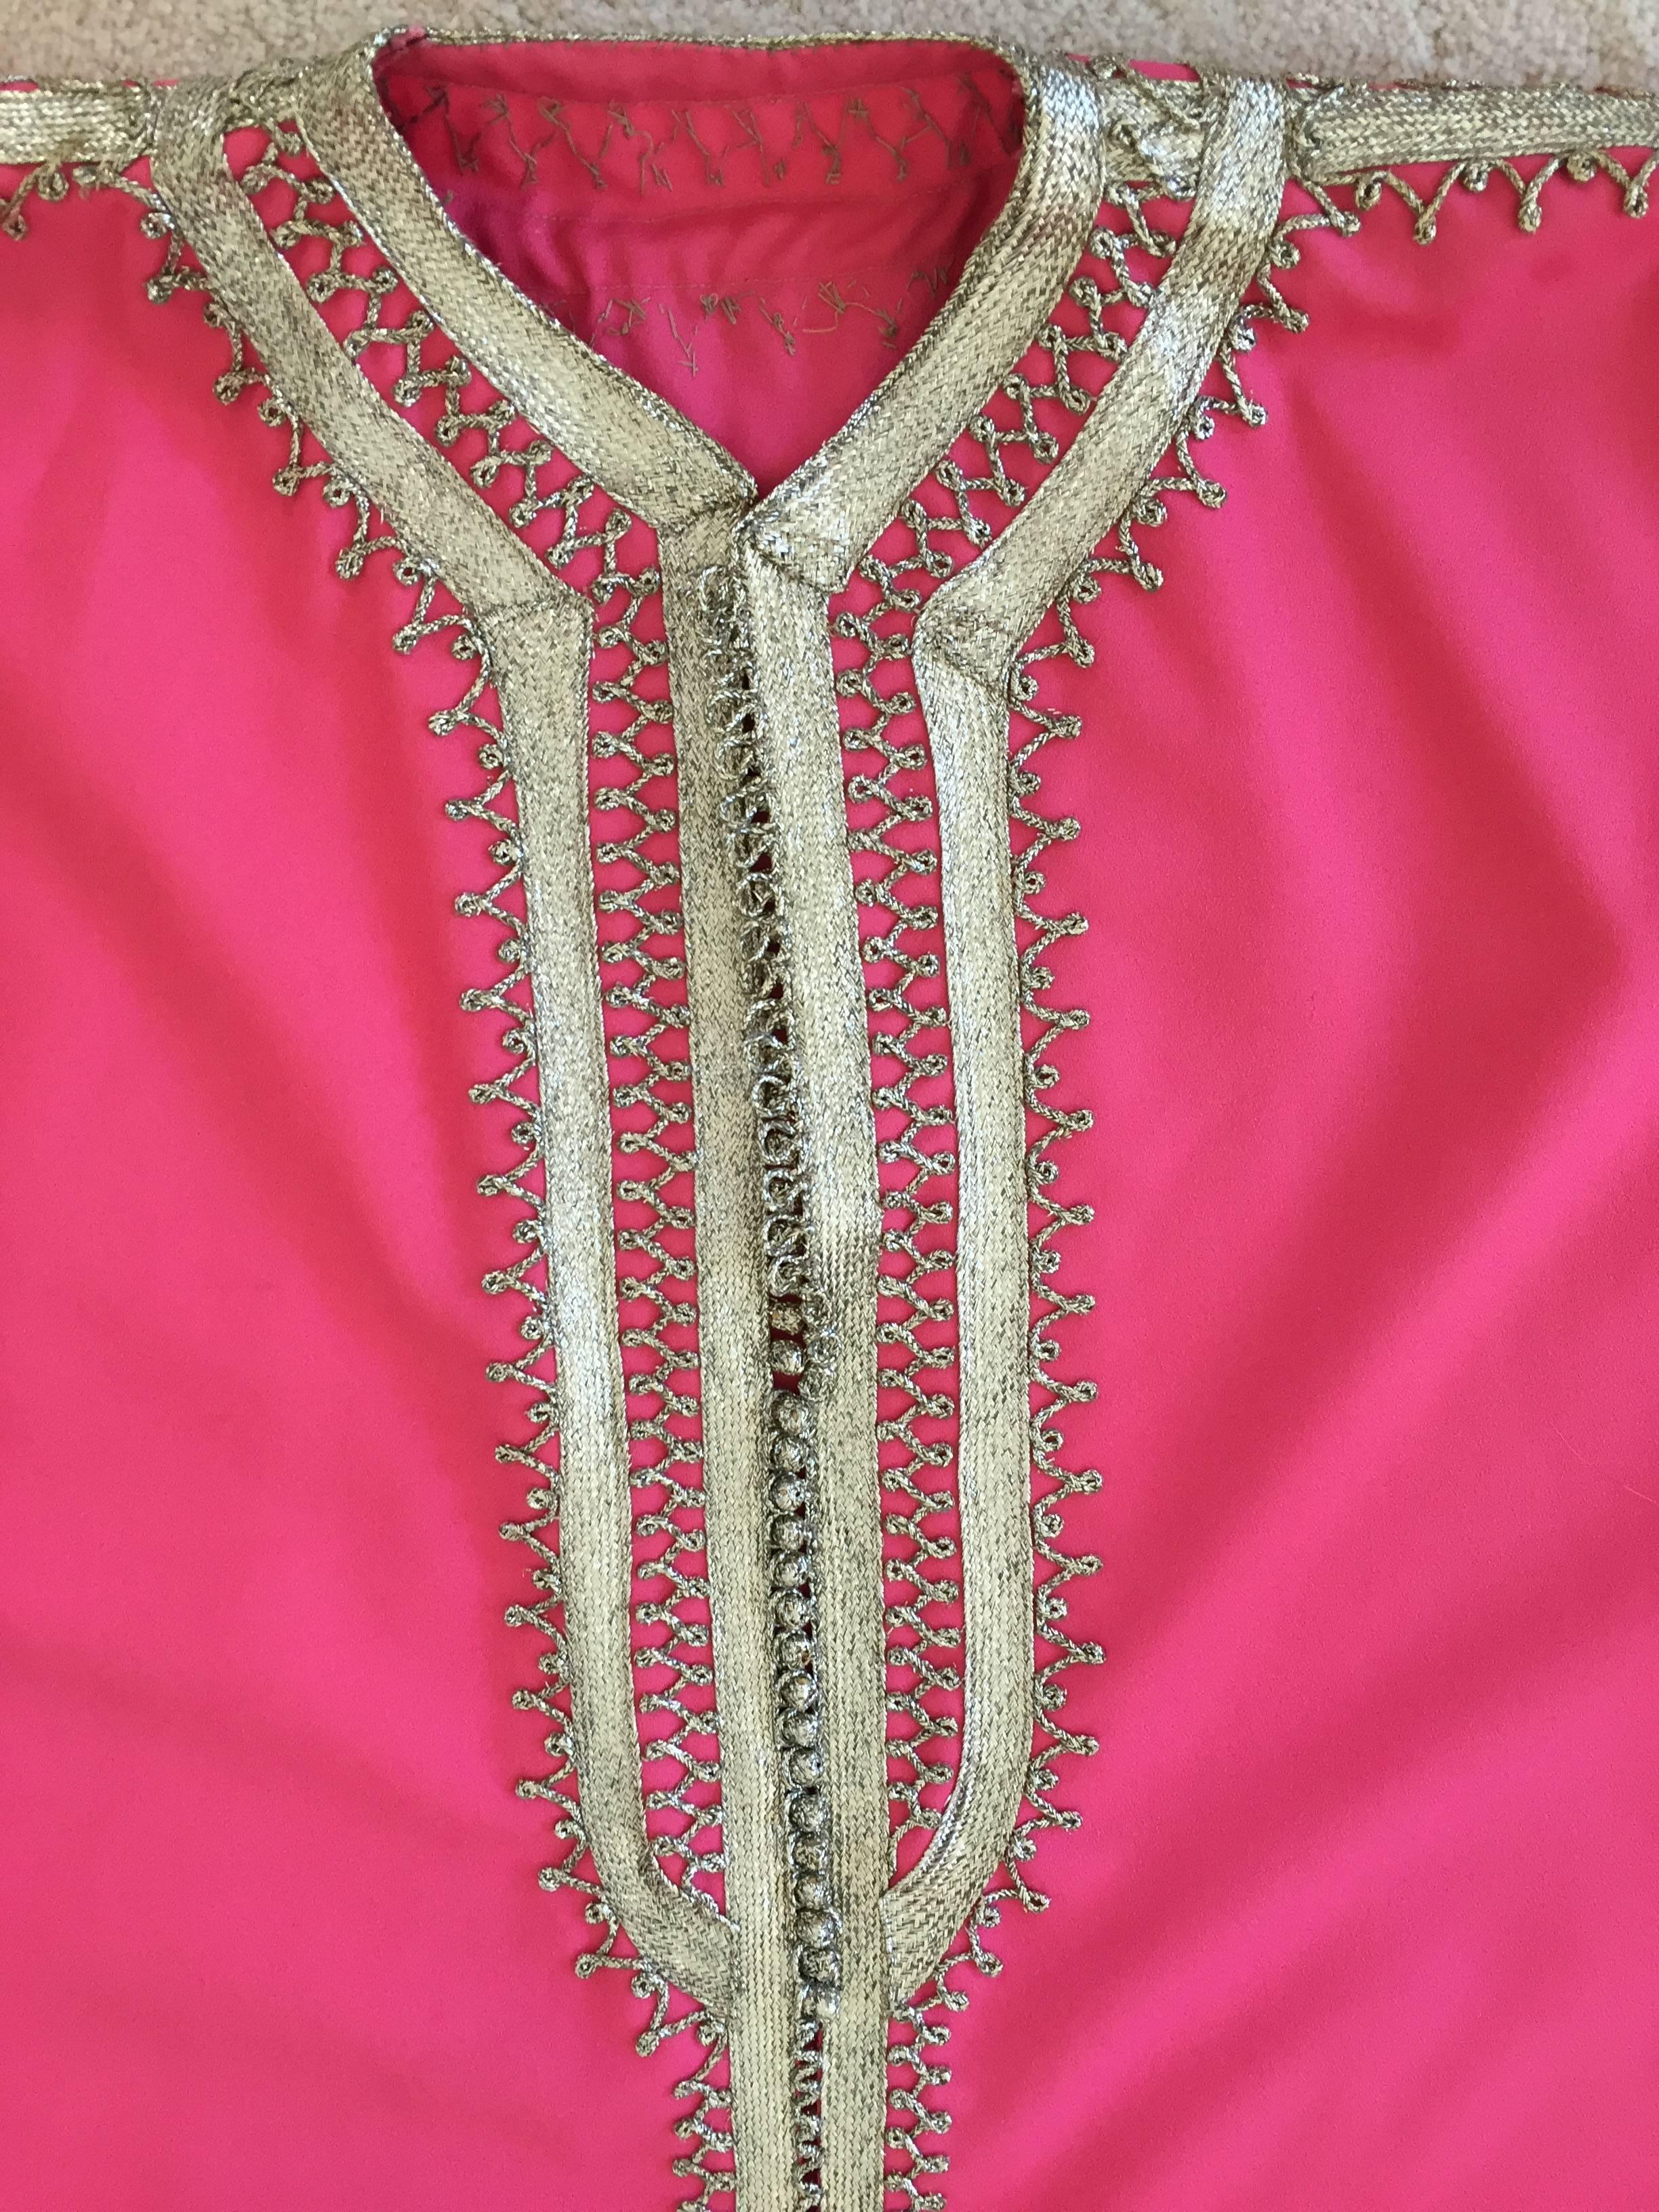 Moroccan Caftan Hot Pink Color Embroidered with Silver, Kaftan circa 1970 For Sale 3